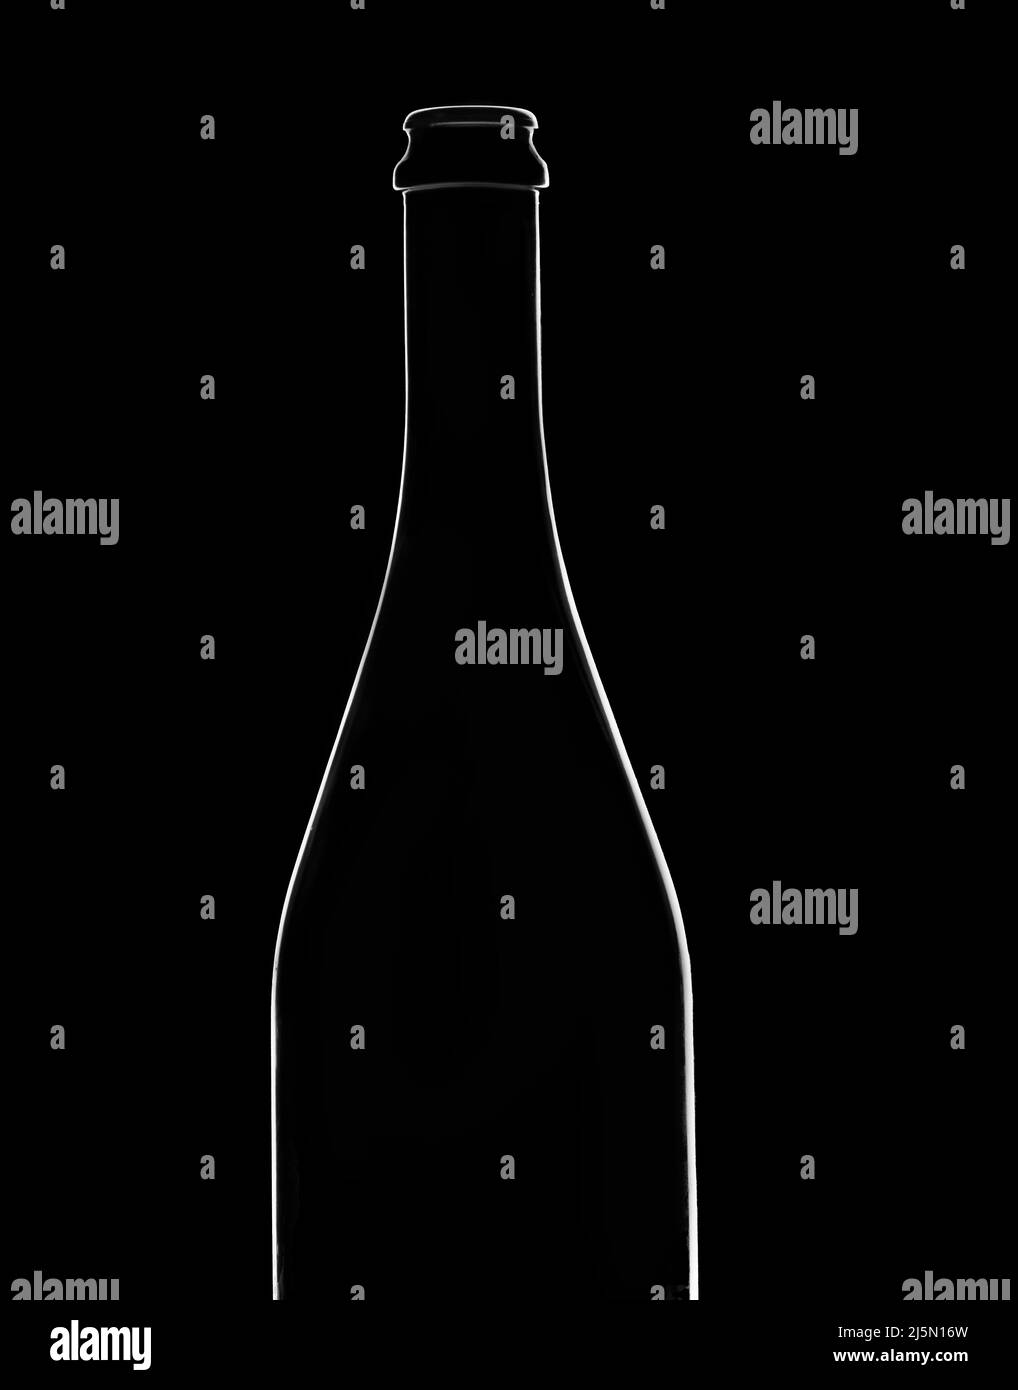 Champagne glass bottle silhouette, isolated black background. Stock Photo